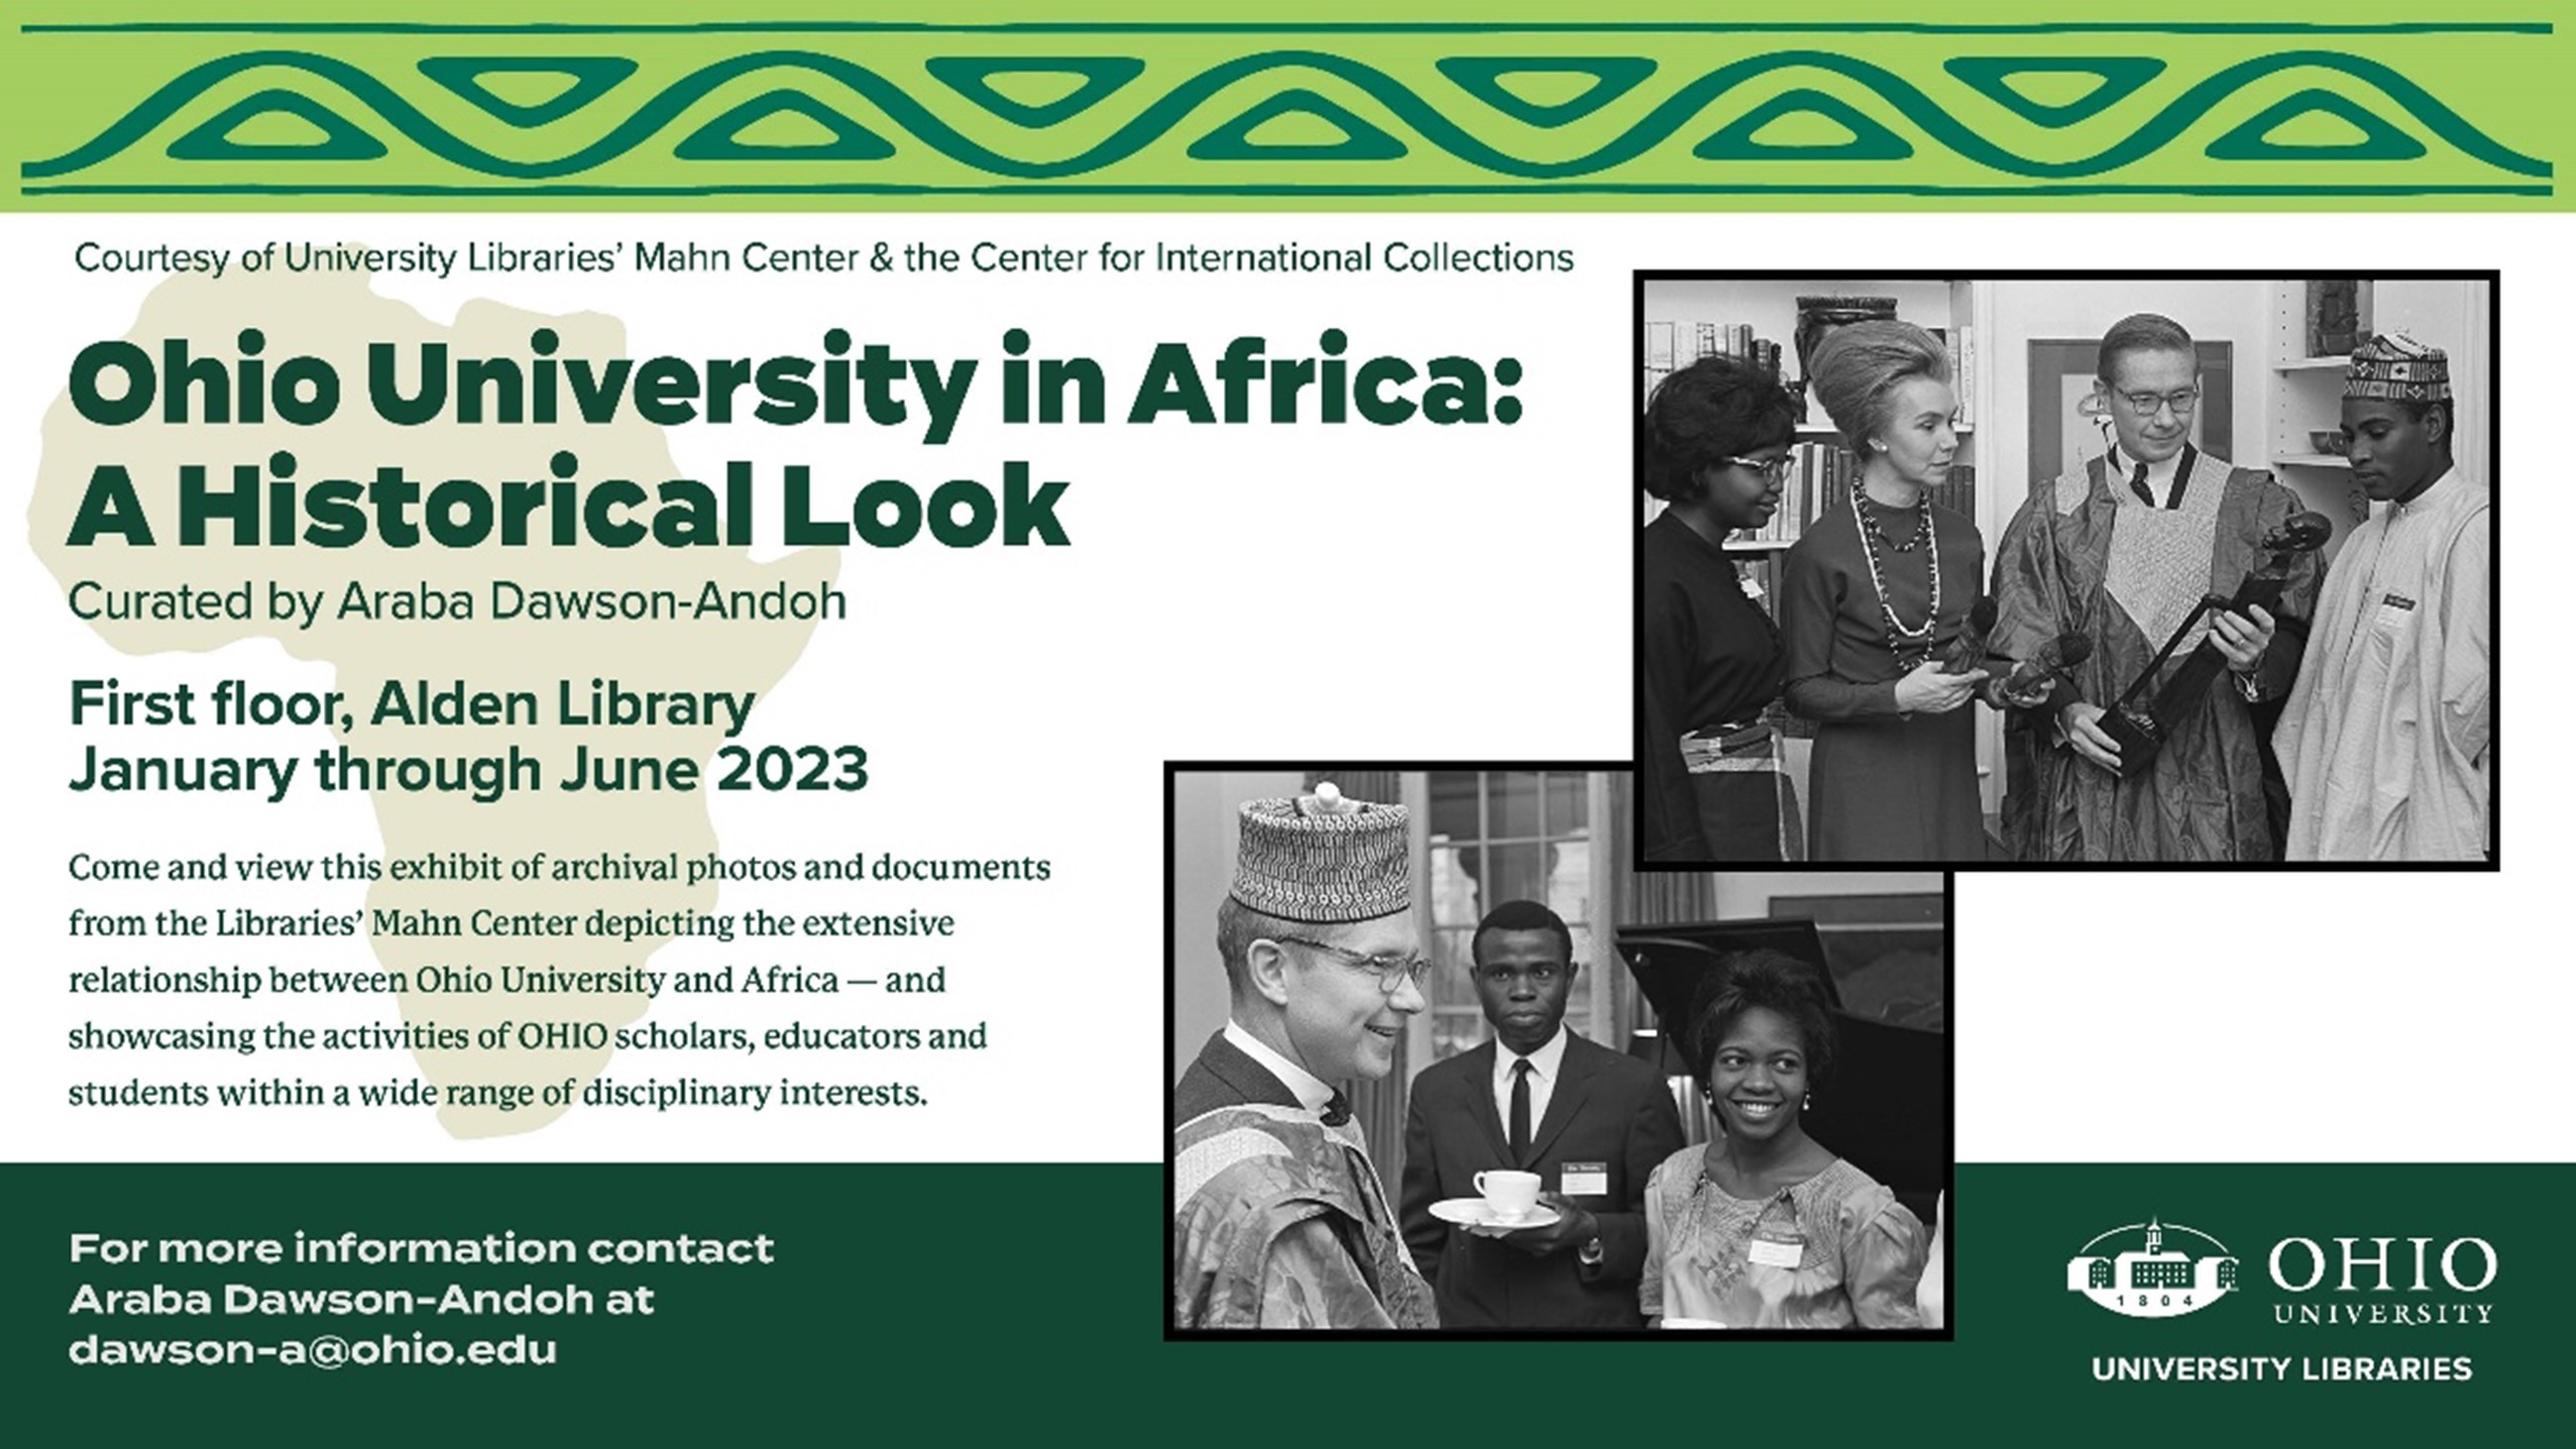 Banner image with details about the OU in Africa exhibit, as described below.